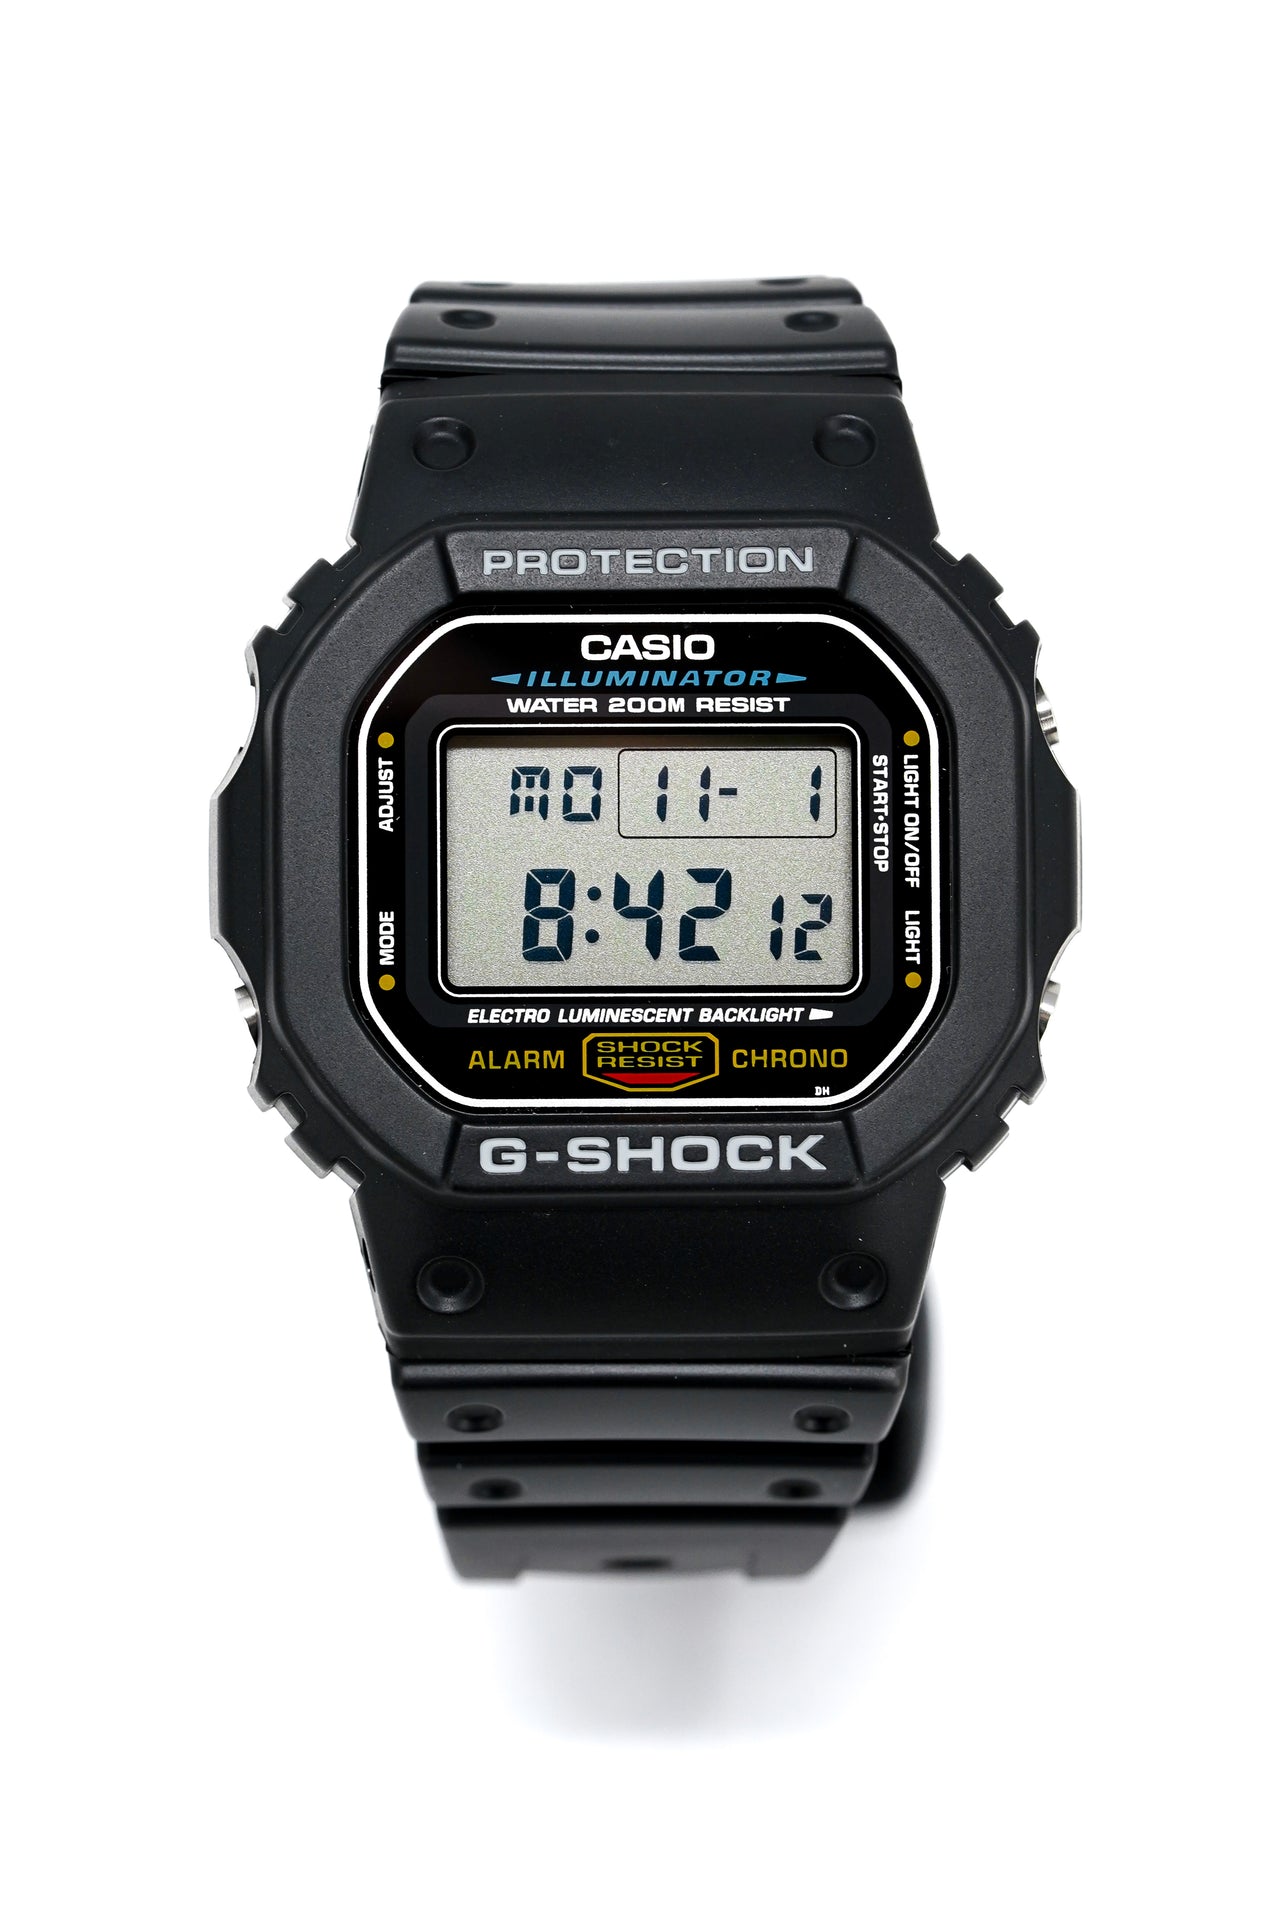 Casio G-Shock Watch Men's Classic Square Black DW-5600E-1VER – Watches   Crystals